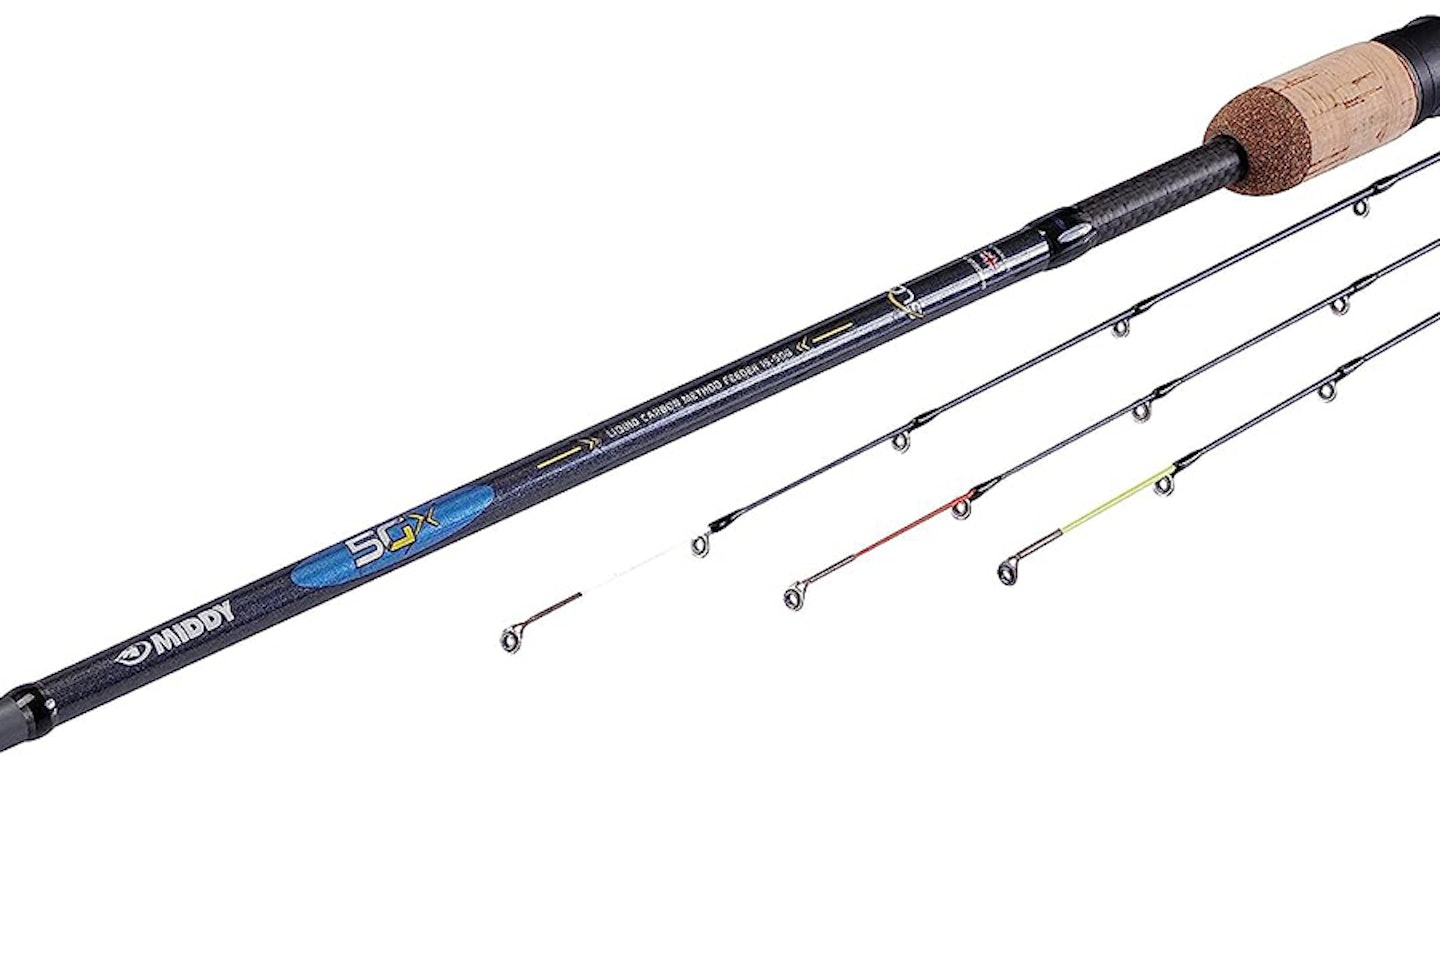 Less Is More - N'ZON Super Slim Feeder Rods